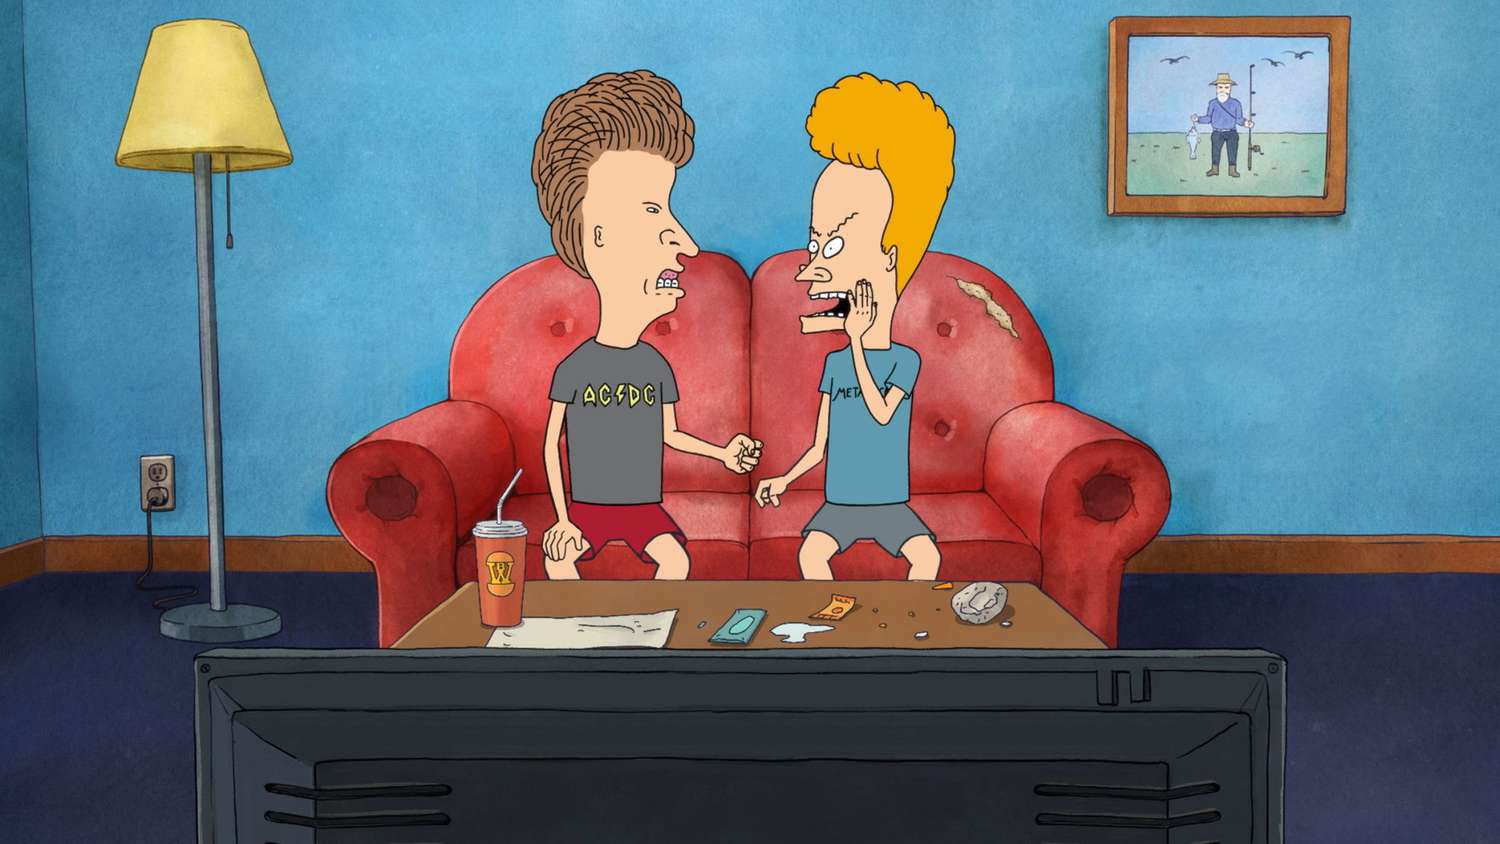 Mike Judge as the voice of Butt-Head and Beavis in Mike Judge's Beavis and Butt-Head episode 2